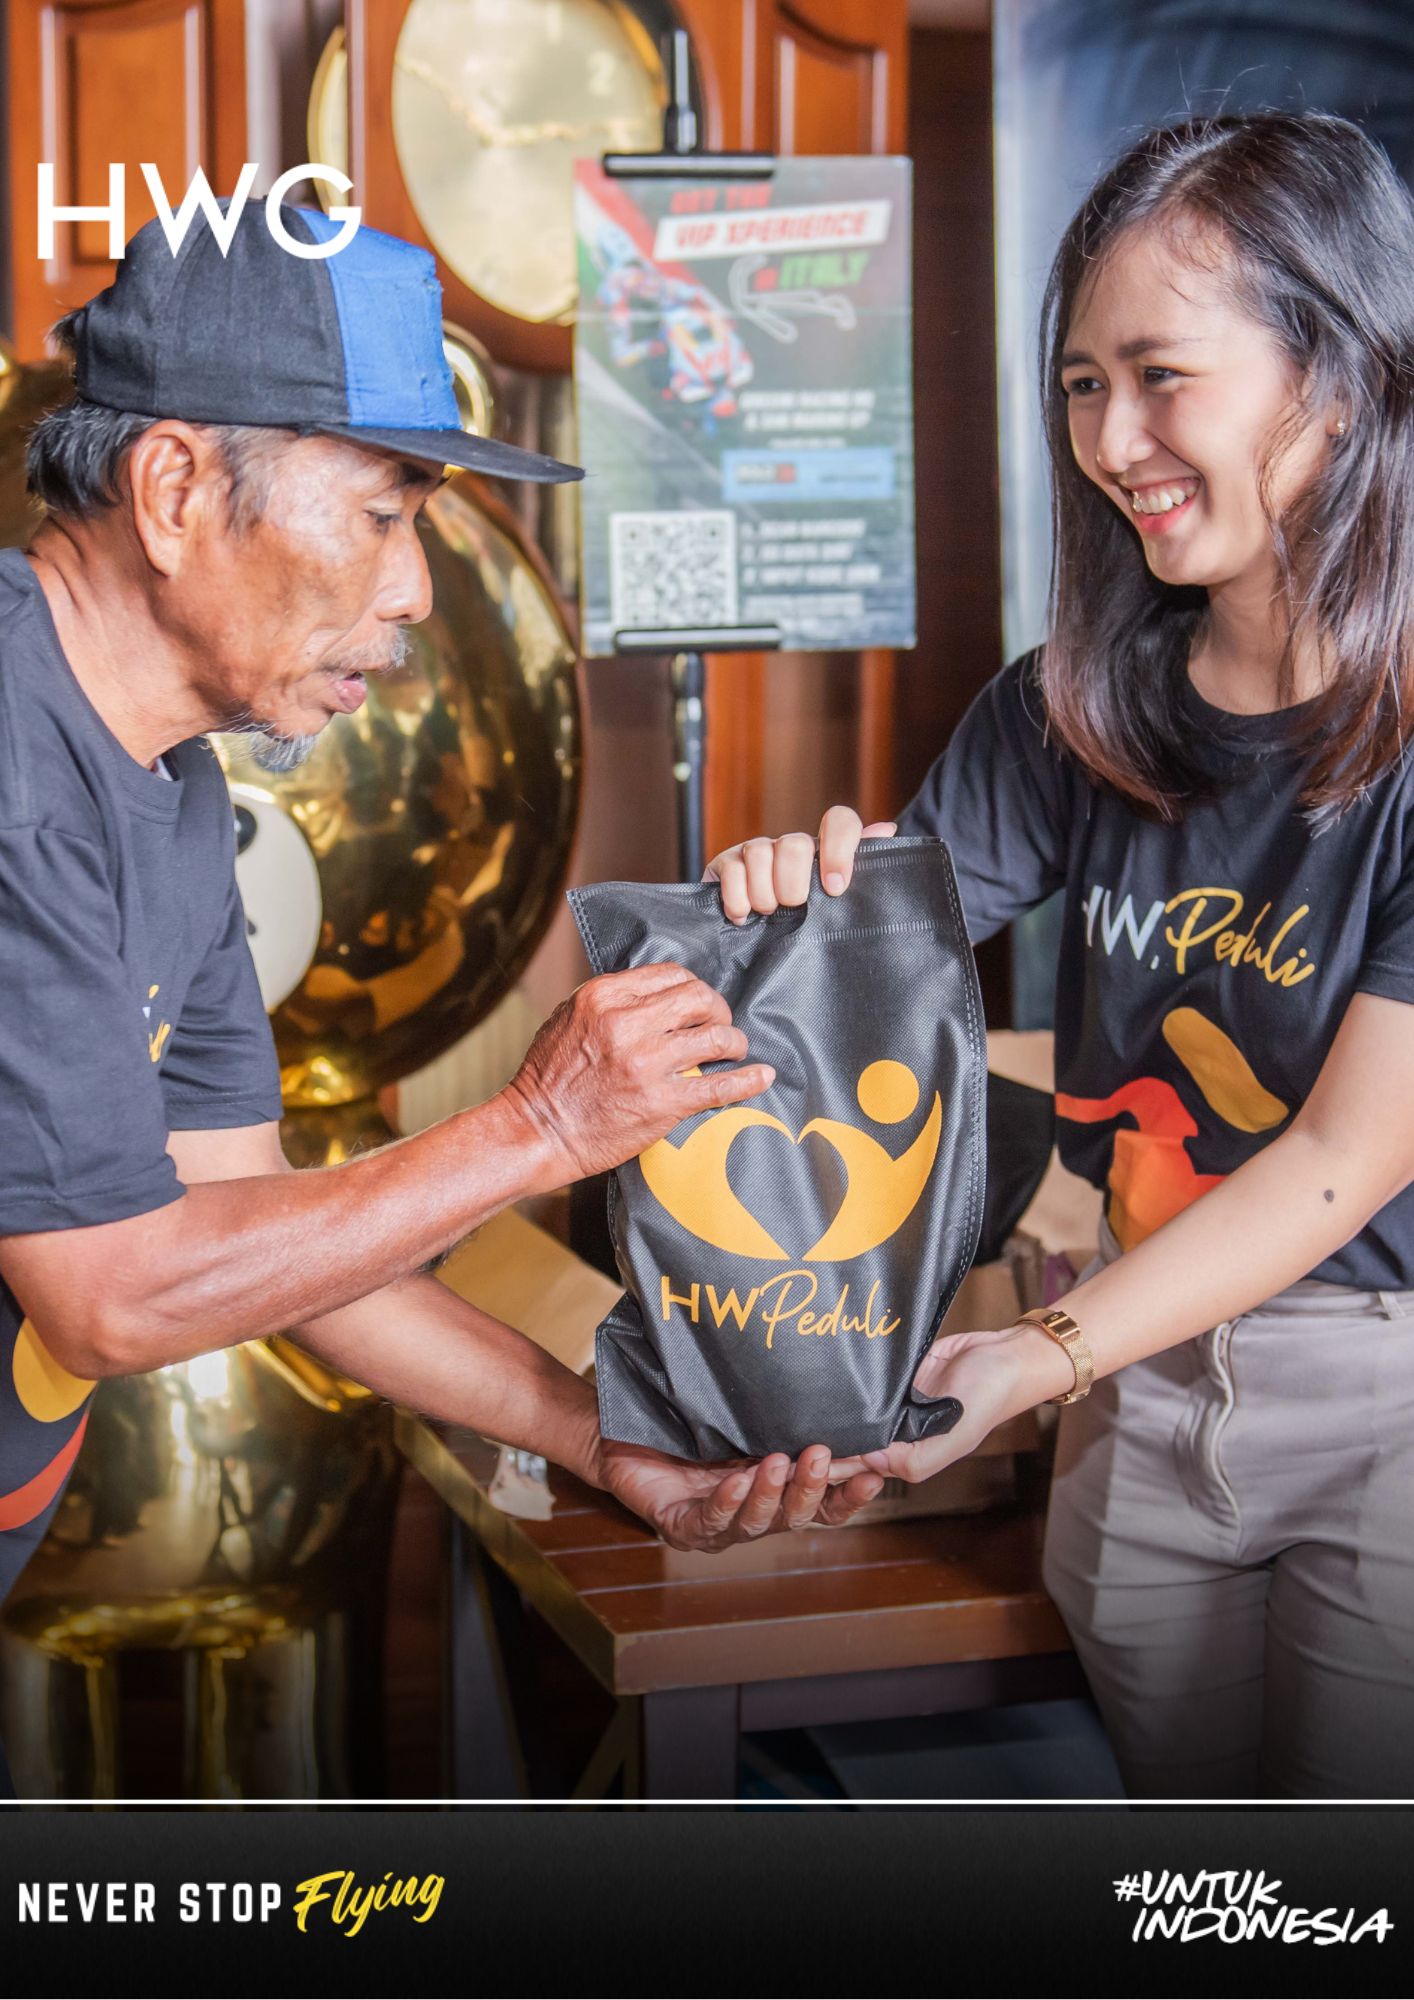 Never Stop Caring: HW Group actively launch HW Peduli program